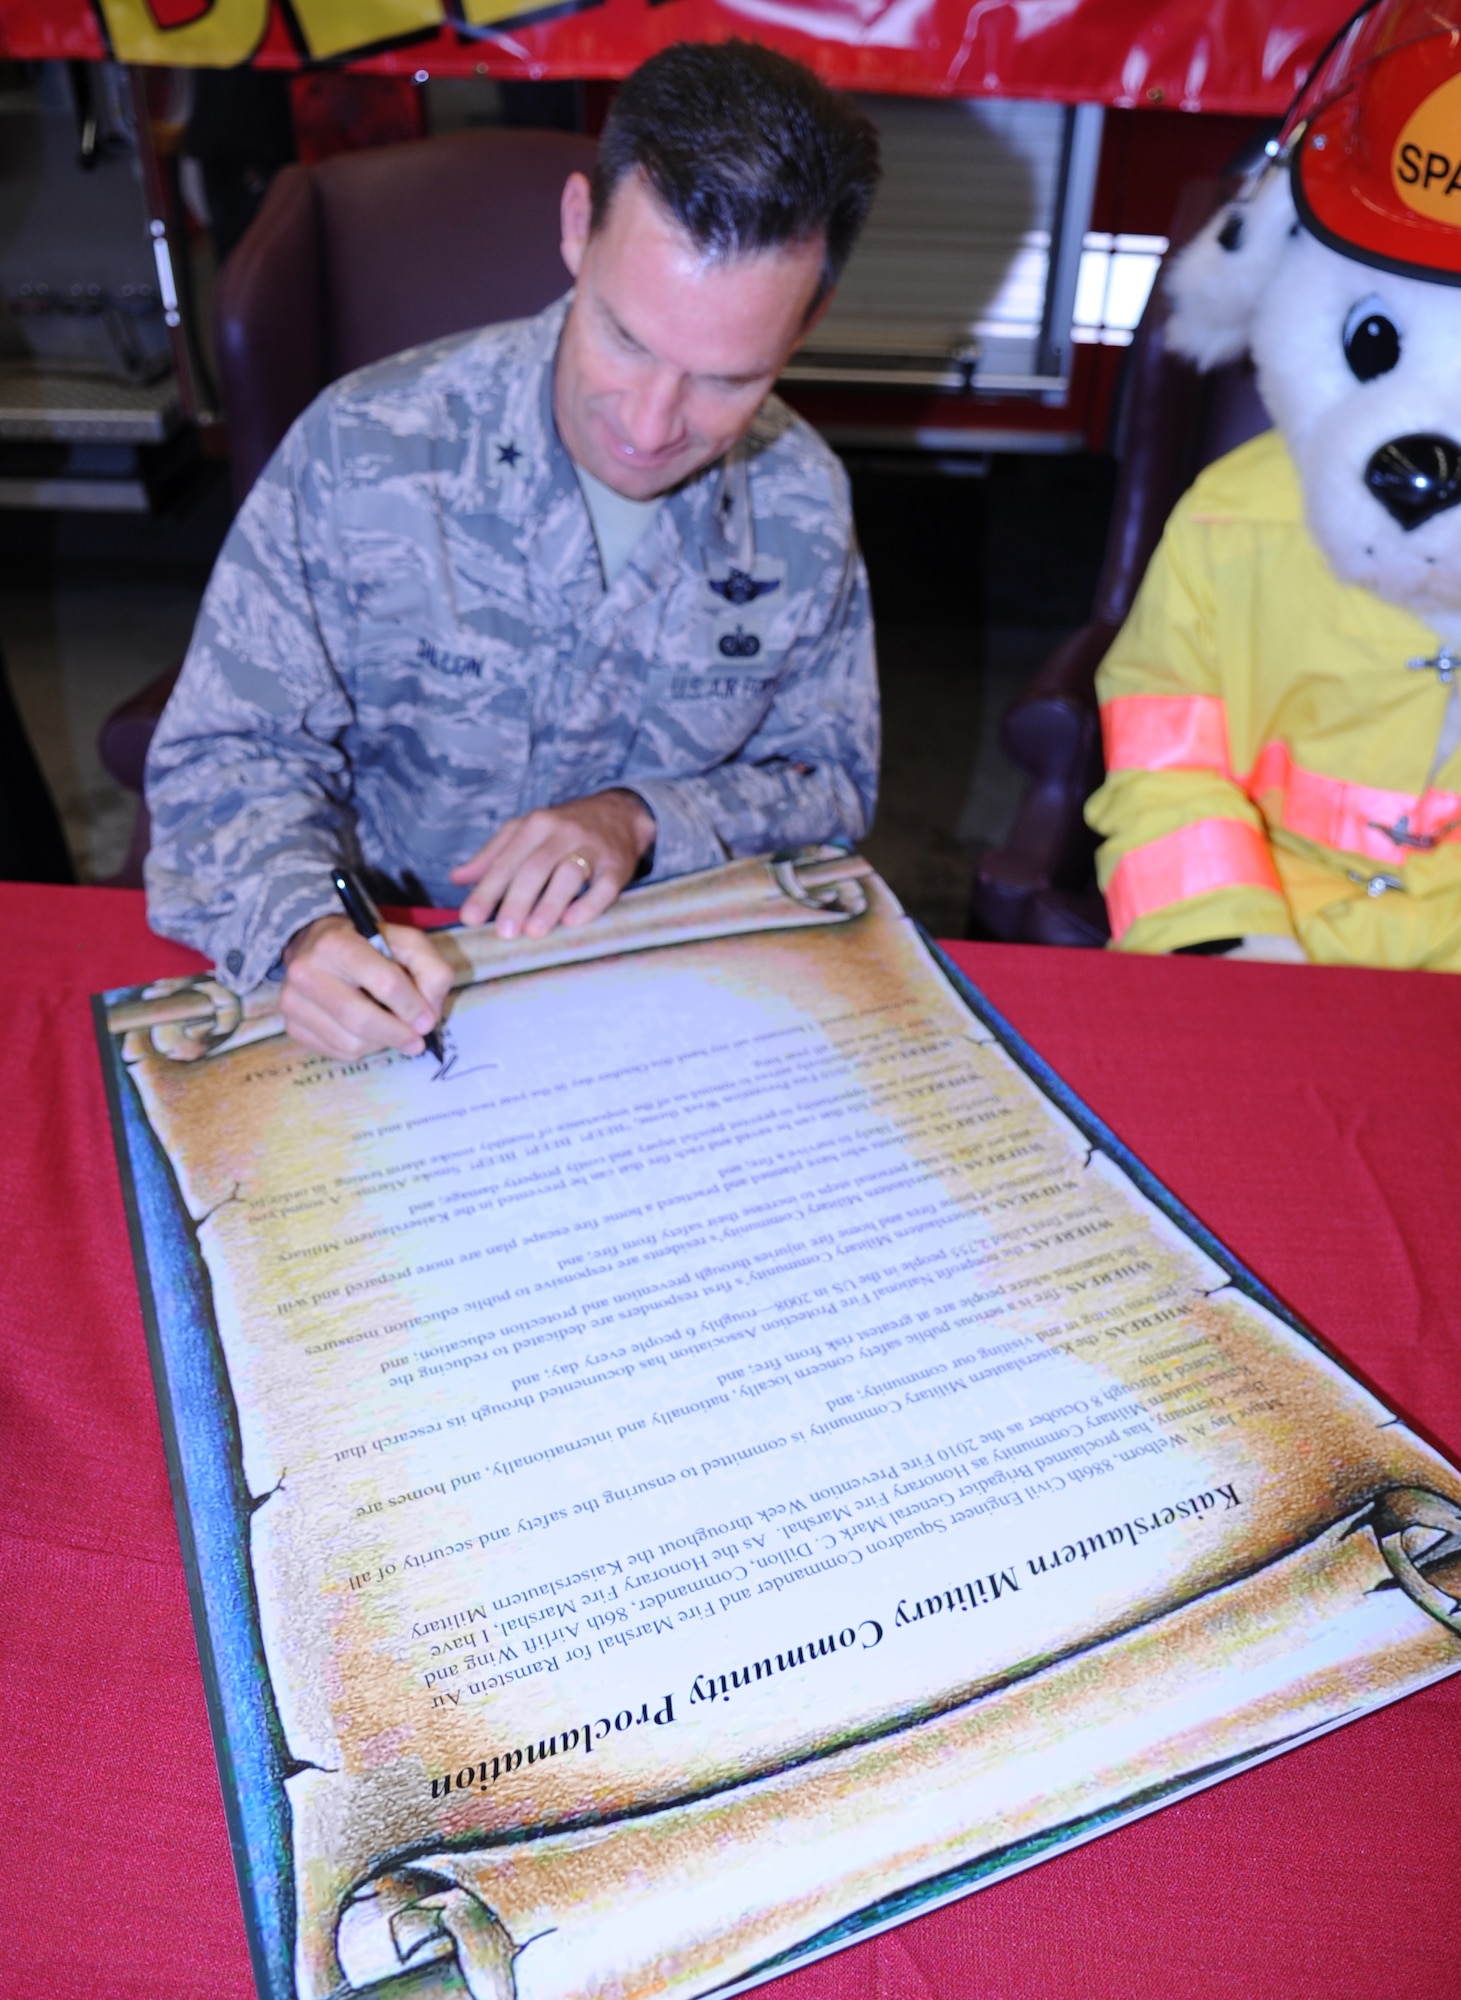 U.S. Air Force Brig. Gen. Mark Dillon, 86th Airlift Wing commander, signs the Kaiserslautern Military Community Proclamation, Ramstein Air Base, Germany, Sept. 10, 2010. The signing of the proclamation was to start National Fire Prevention Week, Oct 3-9, with the first week focusing on, "Beep! Beep! Beep! Smoke Alarm; a sound you can live with". (U.S. Air Force photo by Senior Airman Caleb Pierce)